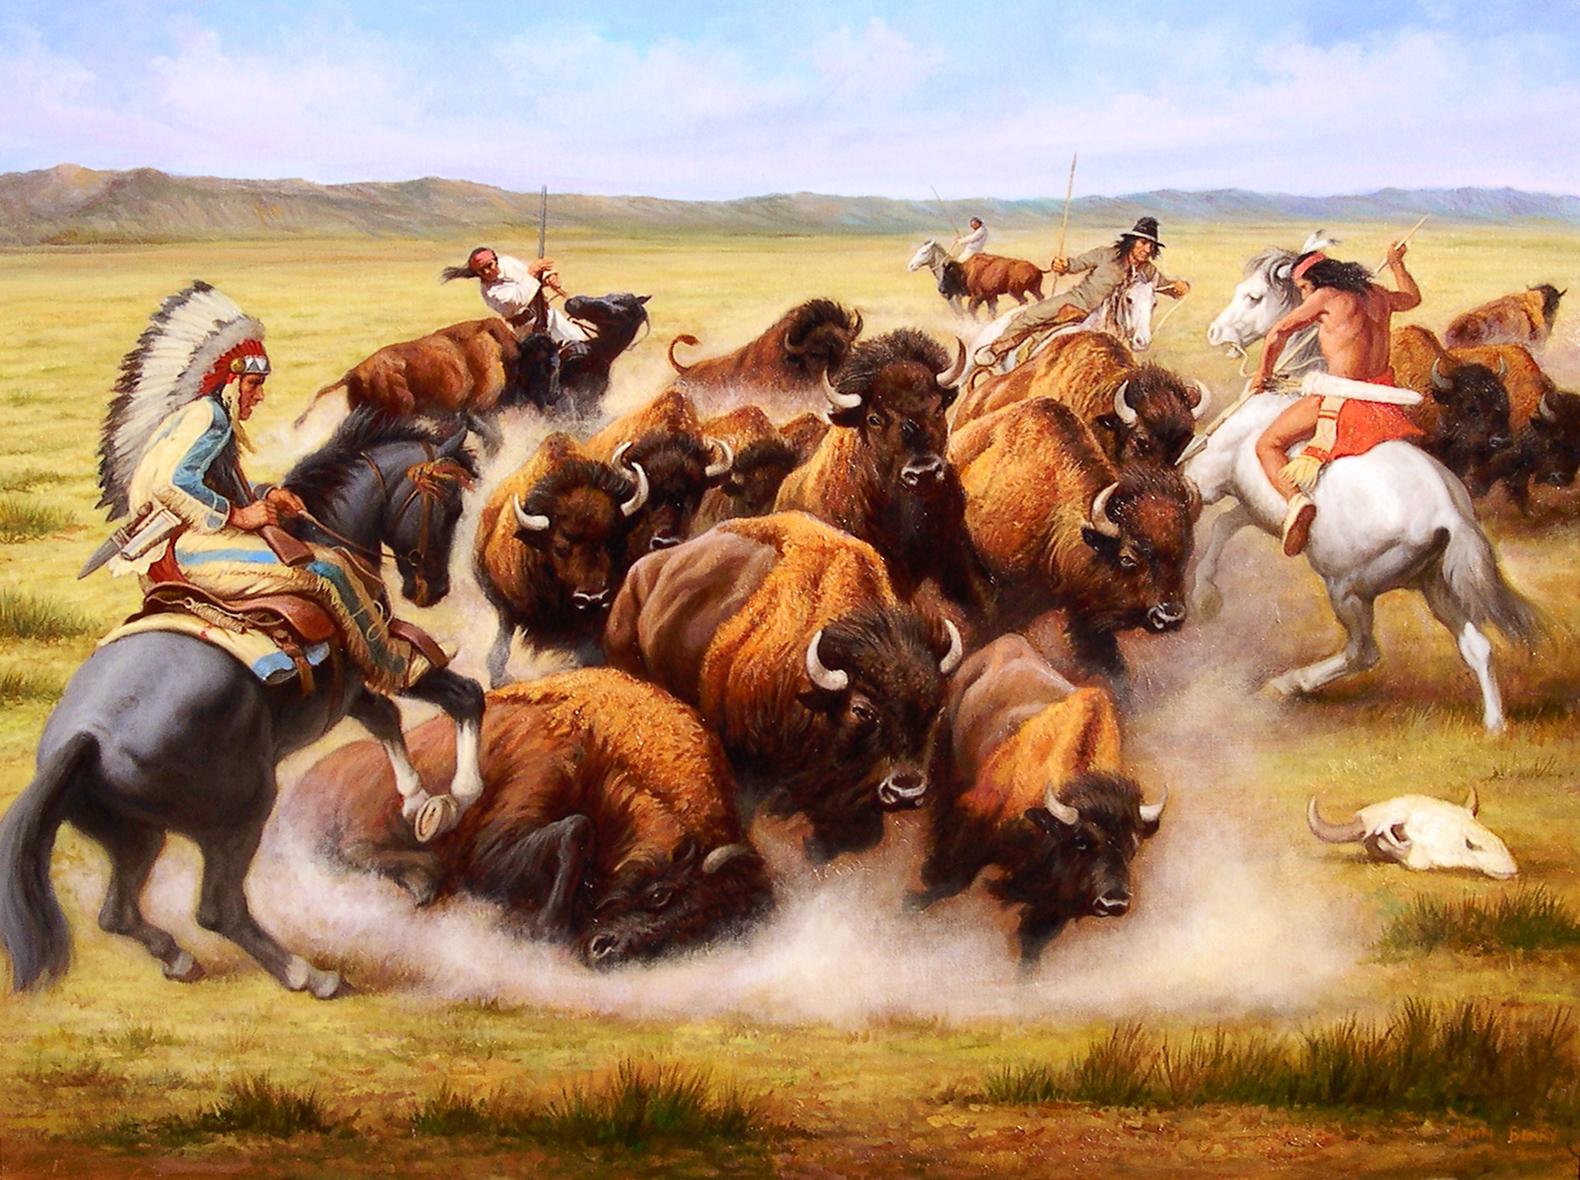 "The Attack", John Berry, Native American Indians, Realism, Oil/Canvas, 30x40 in